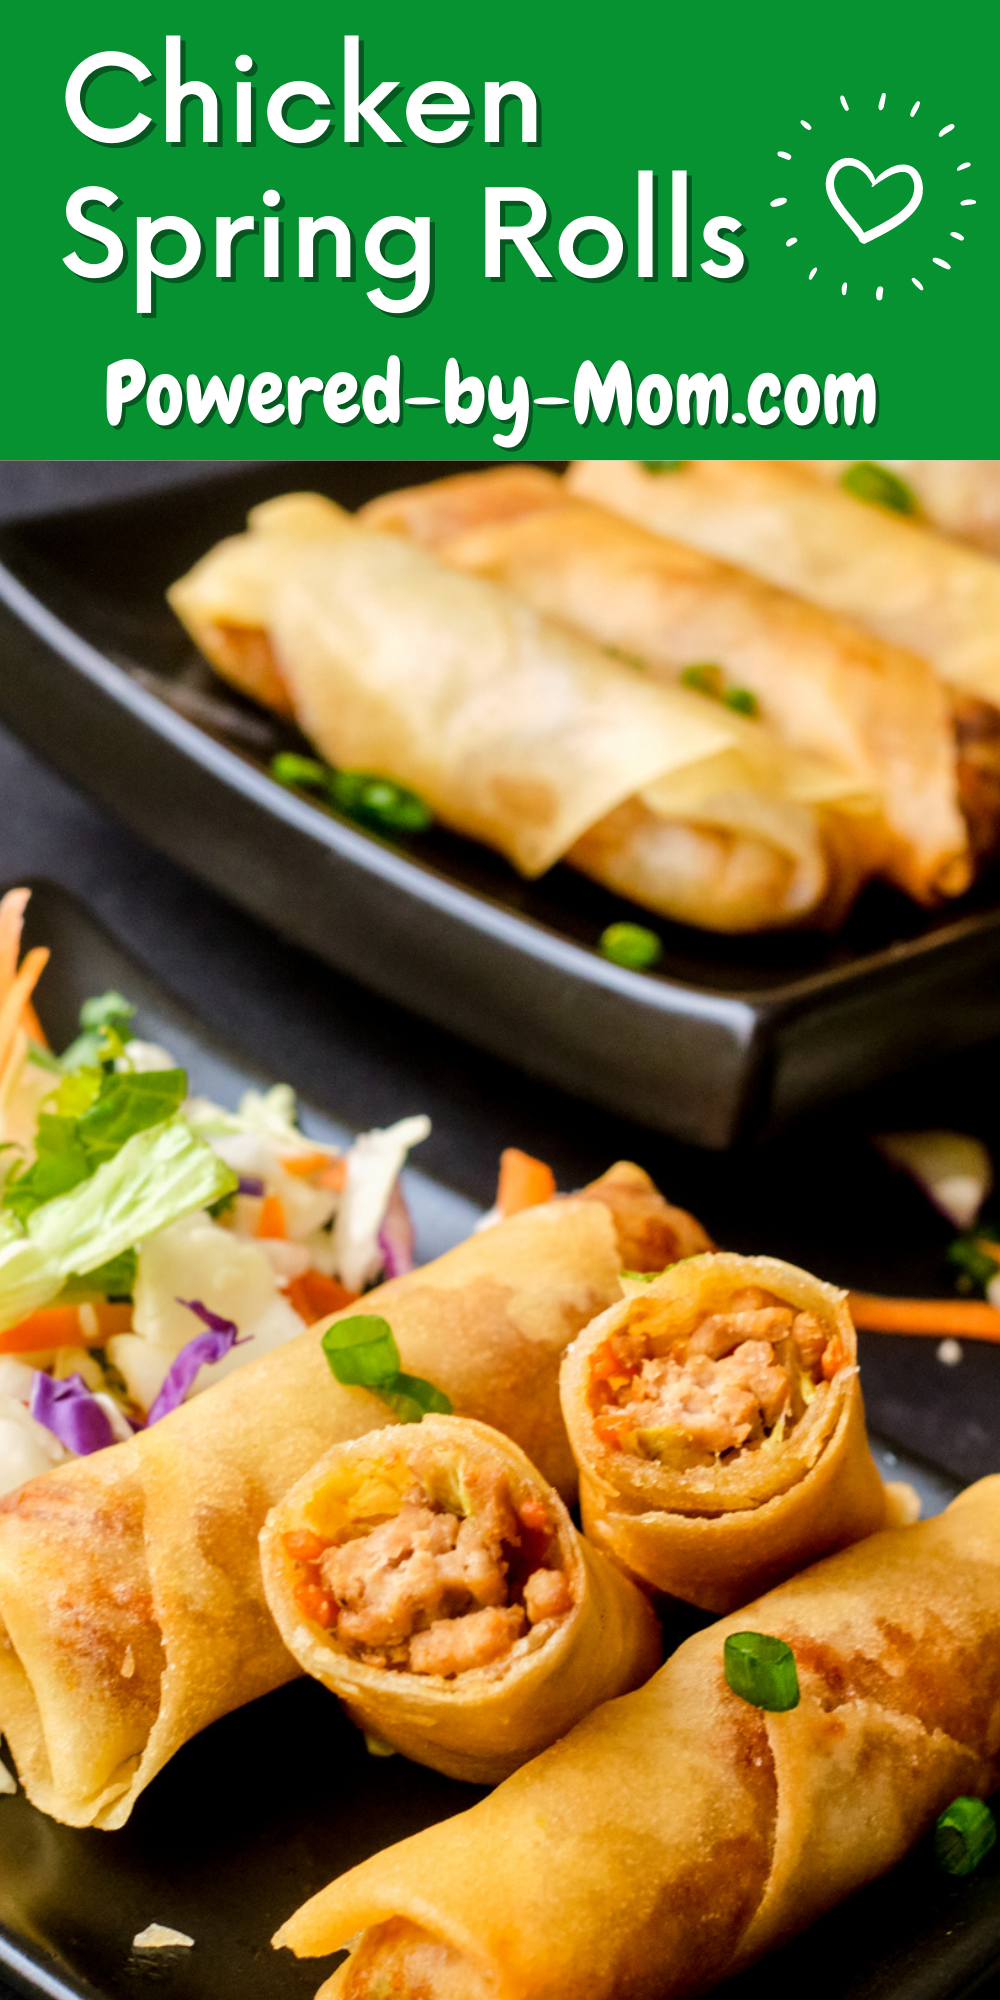 This chicken spring roll recipe is a great addition to any holiday celebration whether it's just you and your close family and friends or a larger gathering or just because you want something yummy. Everyone enjoys these spring rolls so you might want to make some extras (hint, hint). 